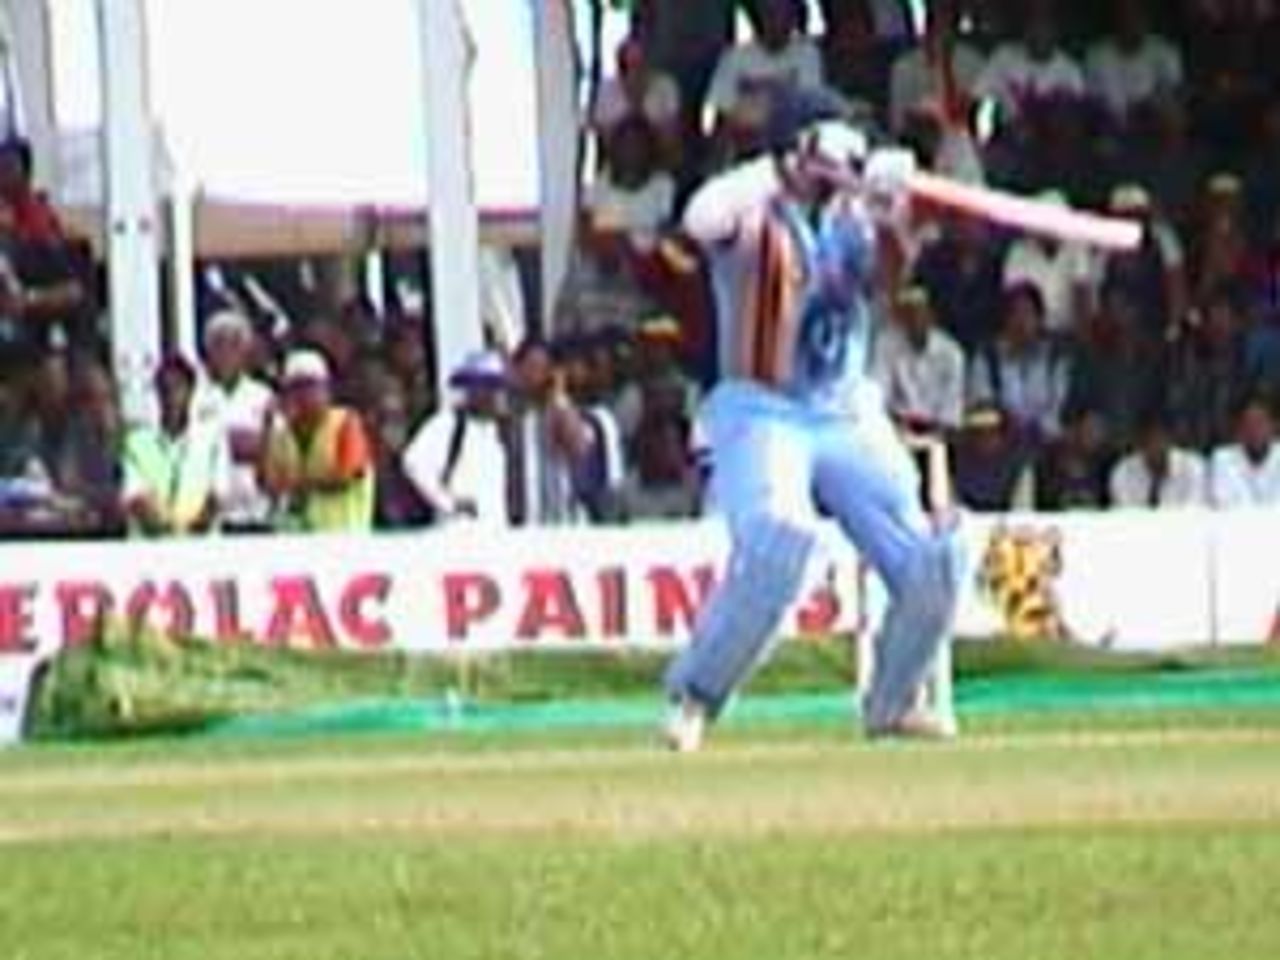 Ganguly glides the ball to third-man, India v West Indies (3rd ODI), Coca-Cola Singapore Challenge, 1999-2000, Kallang Ground, Singapore, 5 Sep 1999.